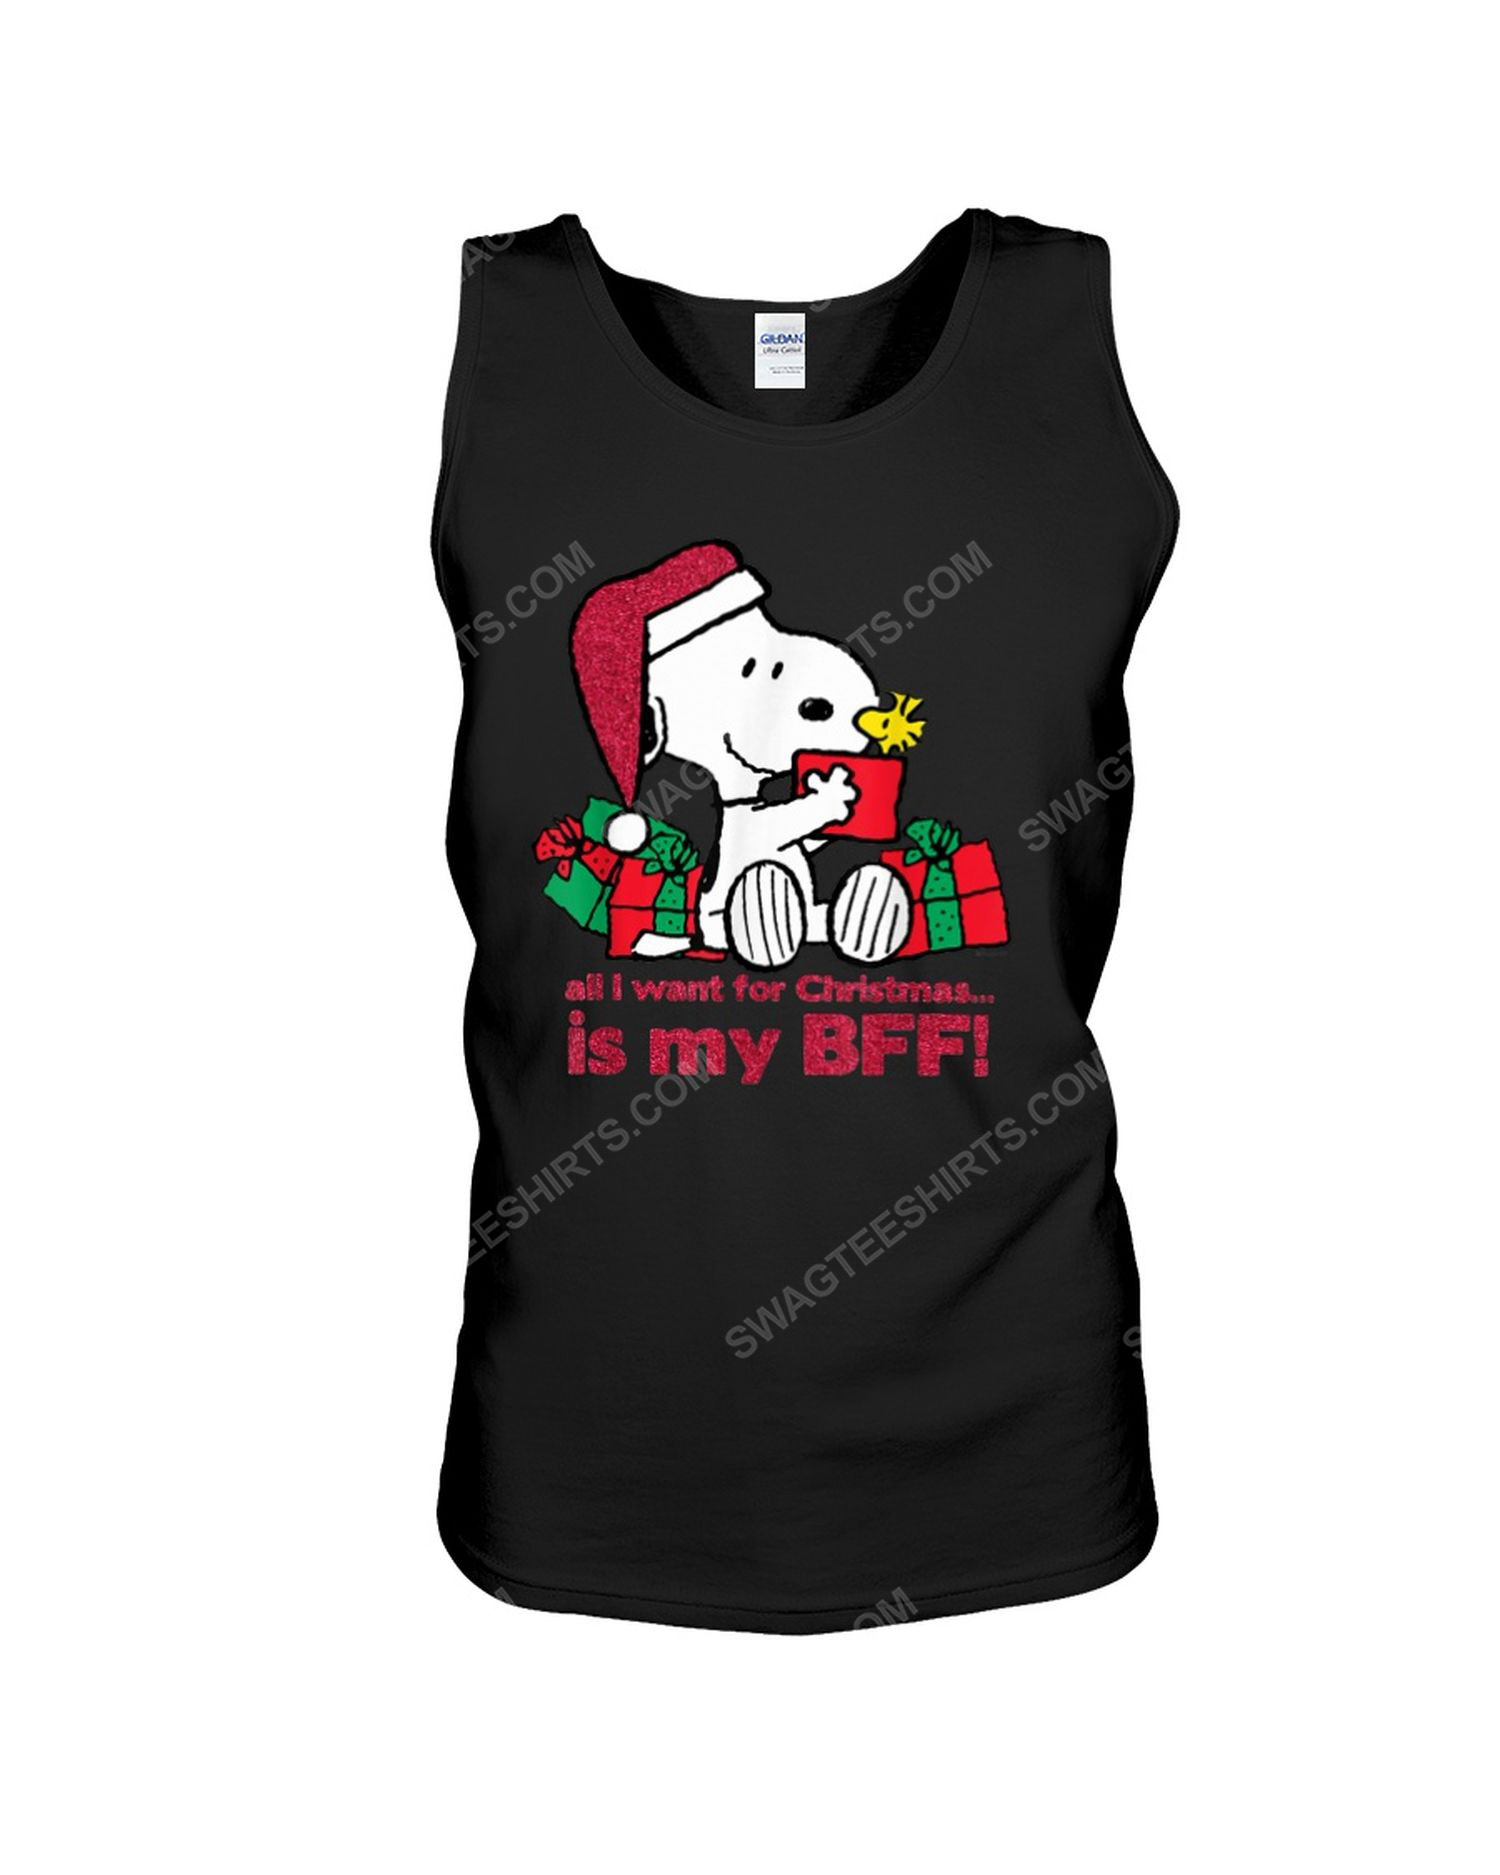 Snoopy all i want for christmas is my bff tank top